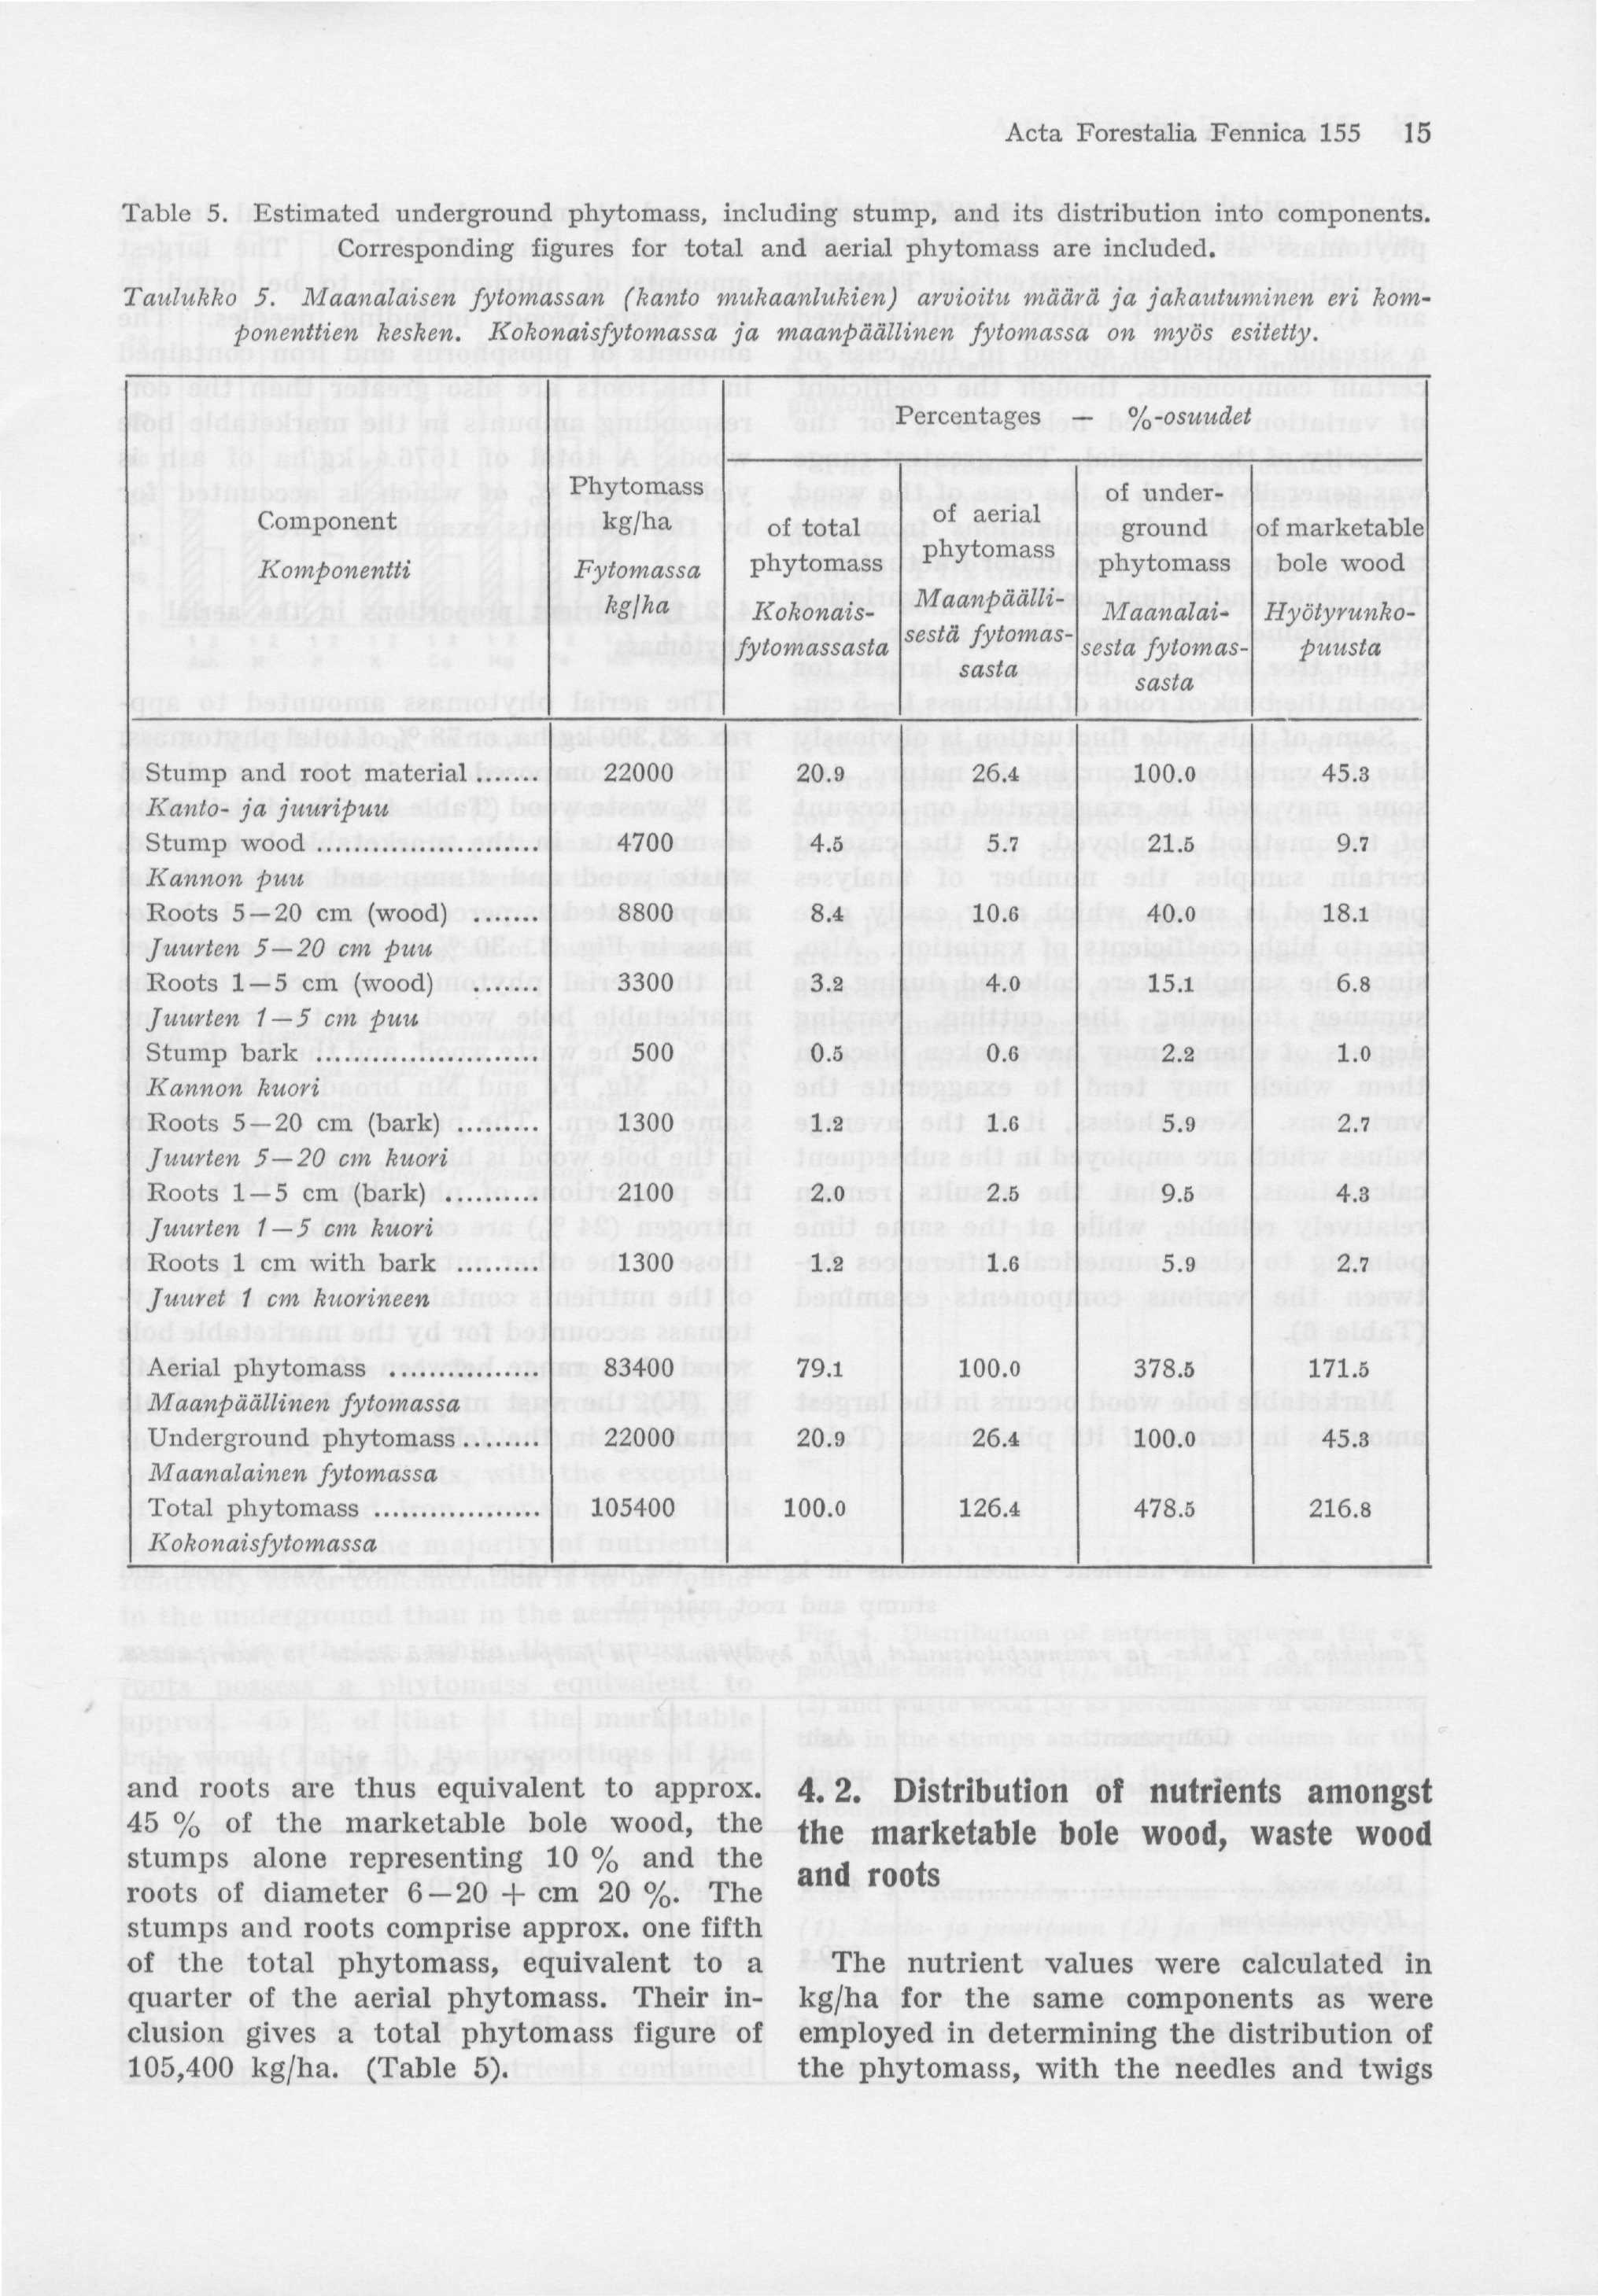 Acta Forestalia Fennica 155 15 Table 5. Estimated underground phytomass, including stump, and its distribution into components. Corresponding figures for total and aerial phytomass are included.